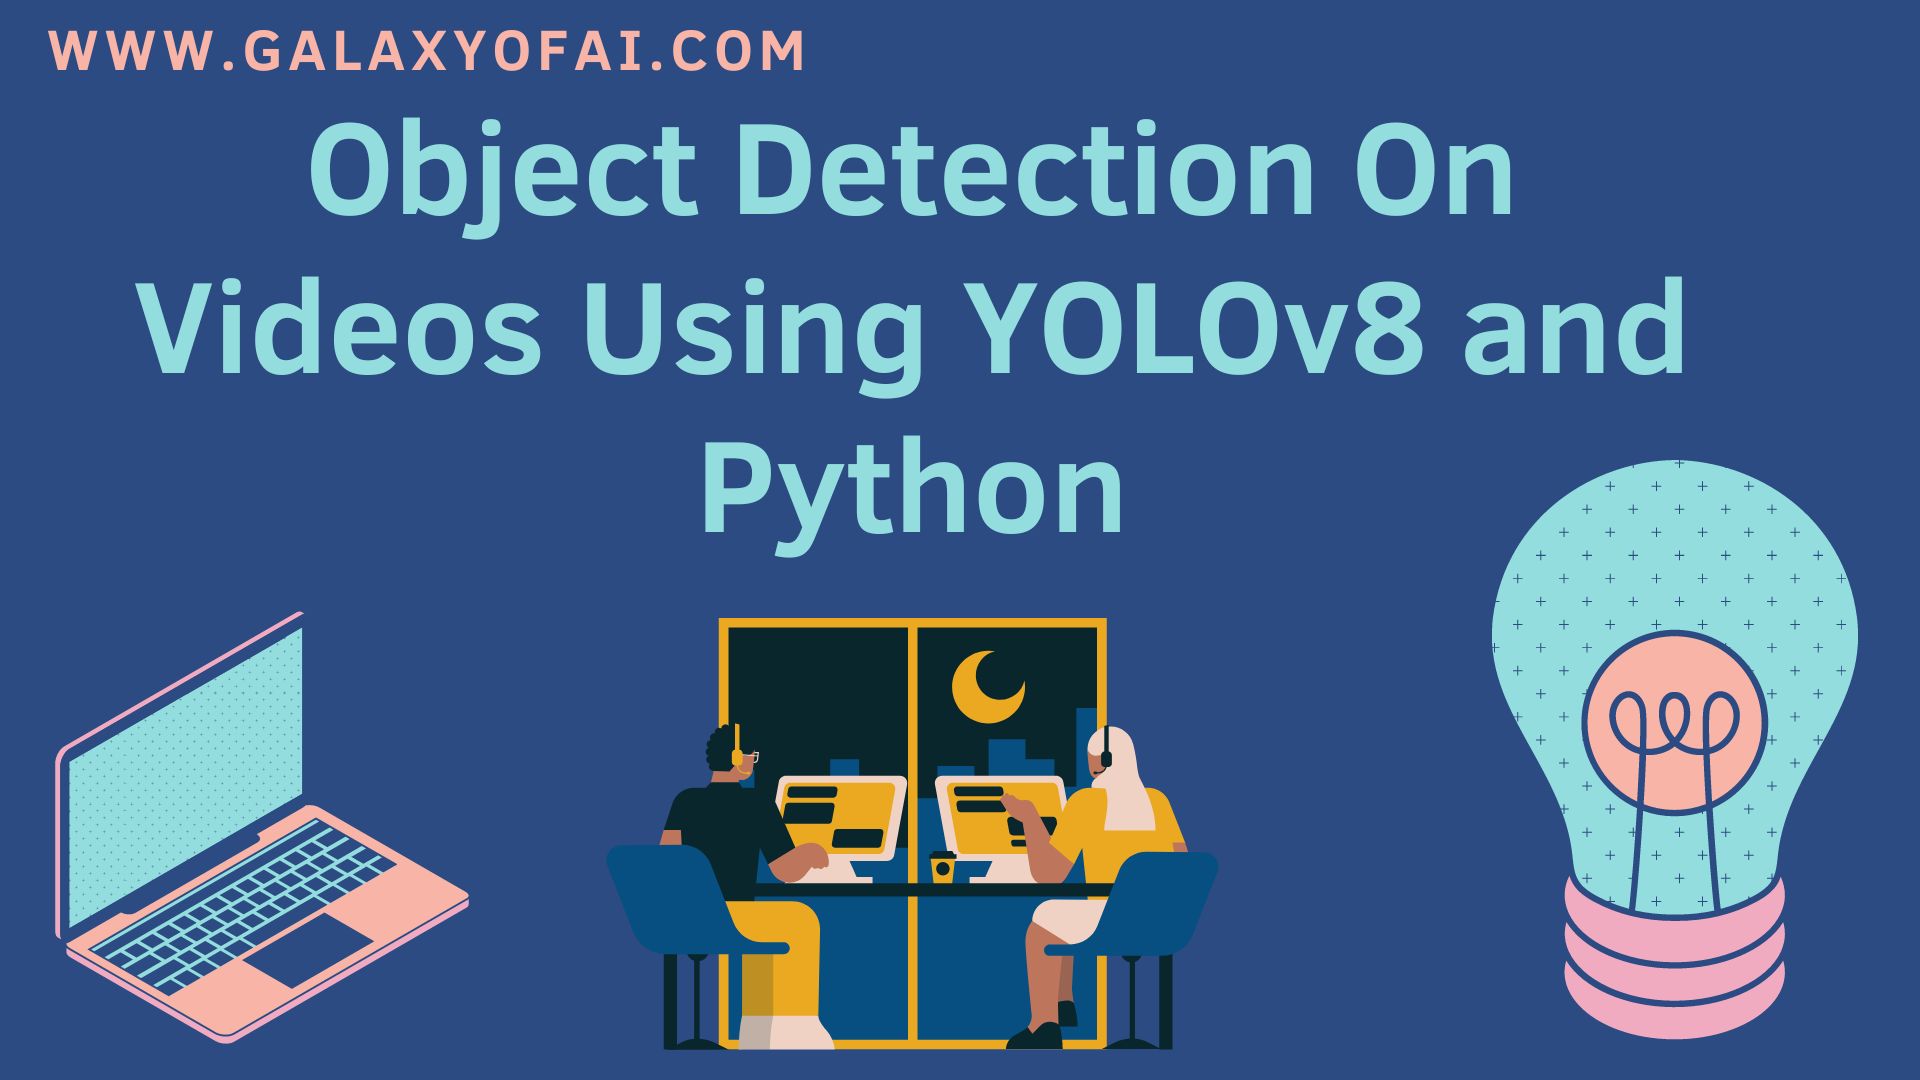 Object Detection On Videos Using YOLOv8 and Python